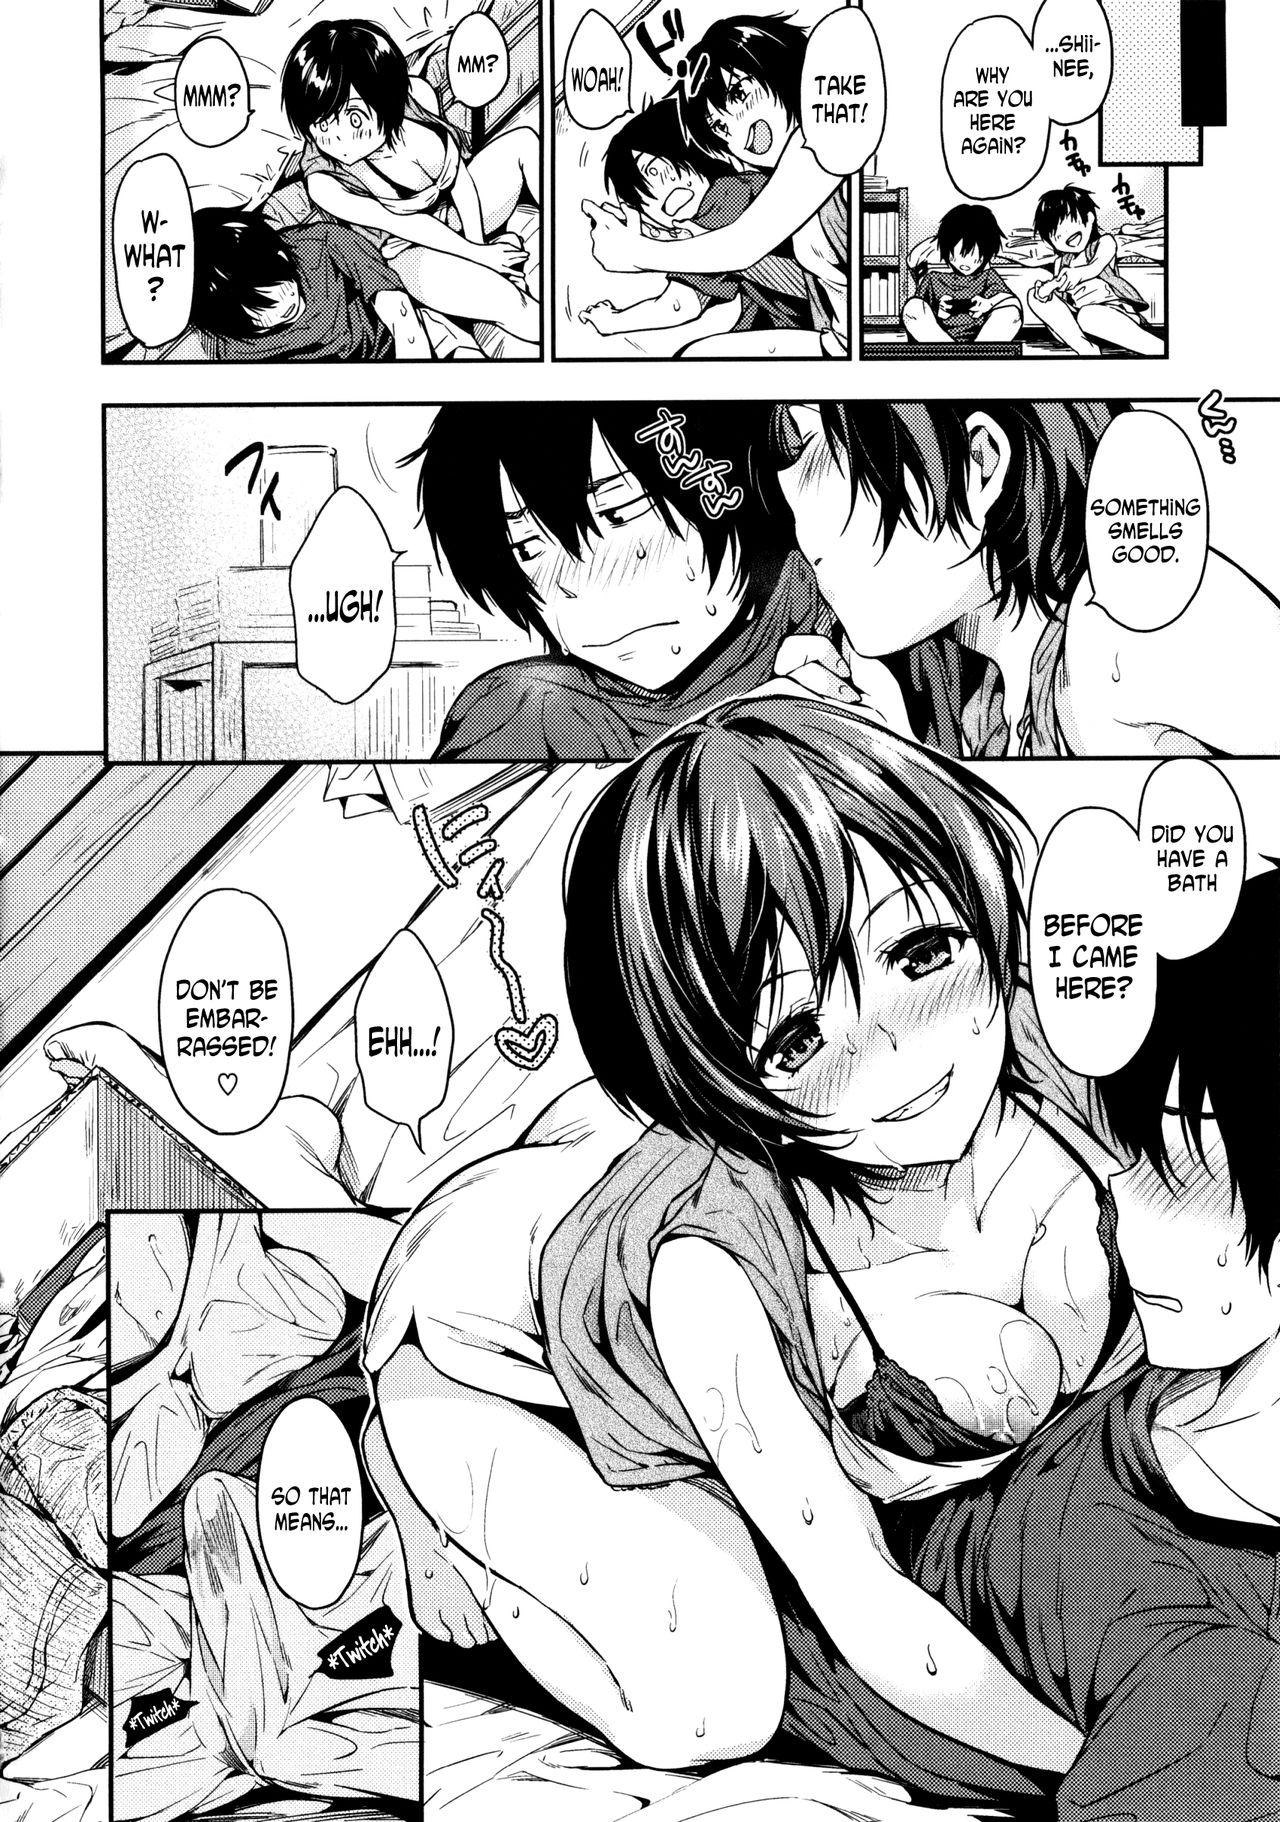 Skinship Shiyo | Let's Have Some Physical Contact 3